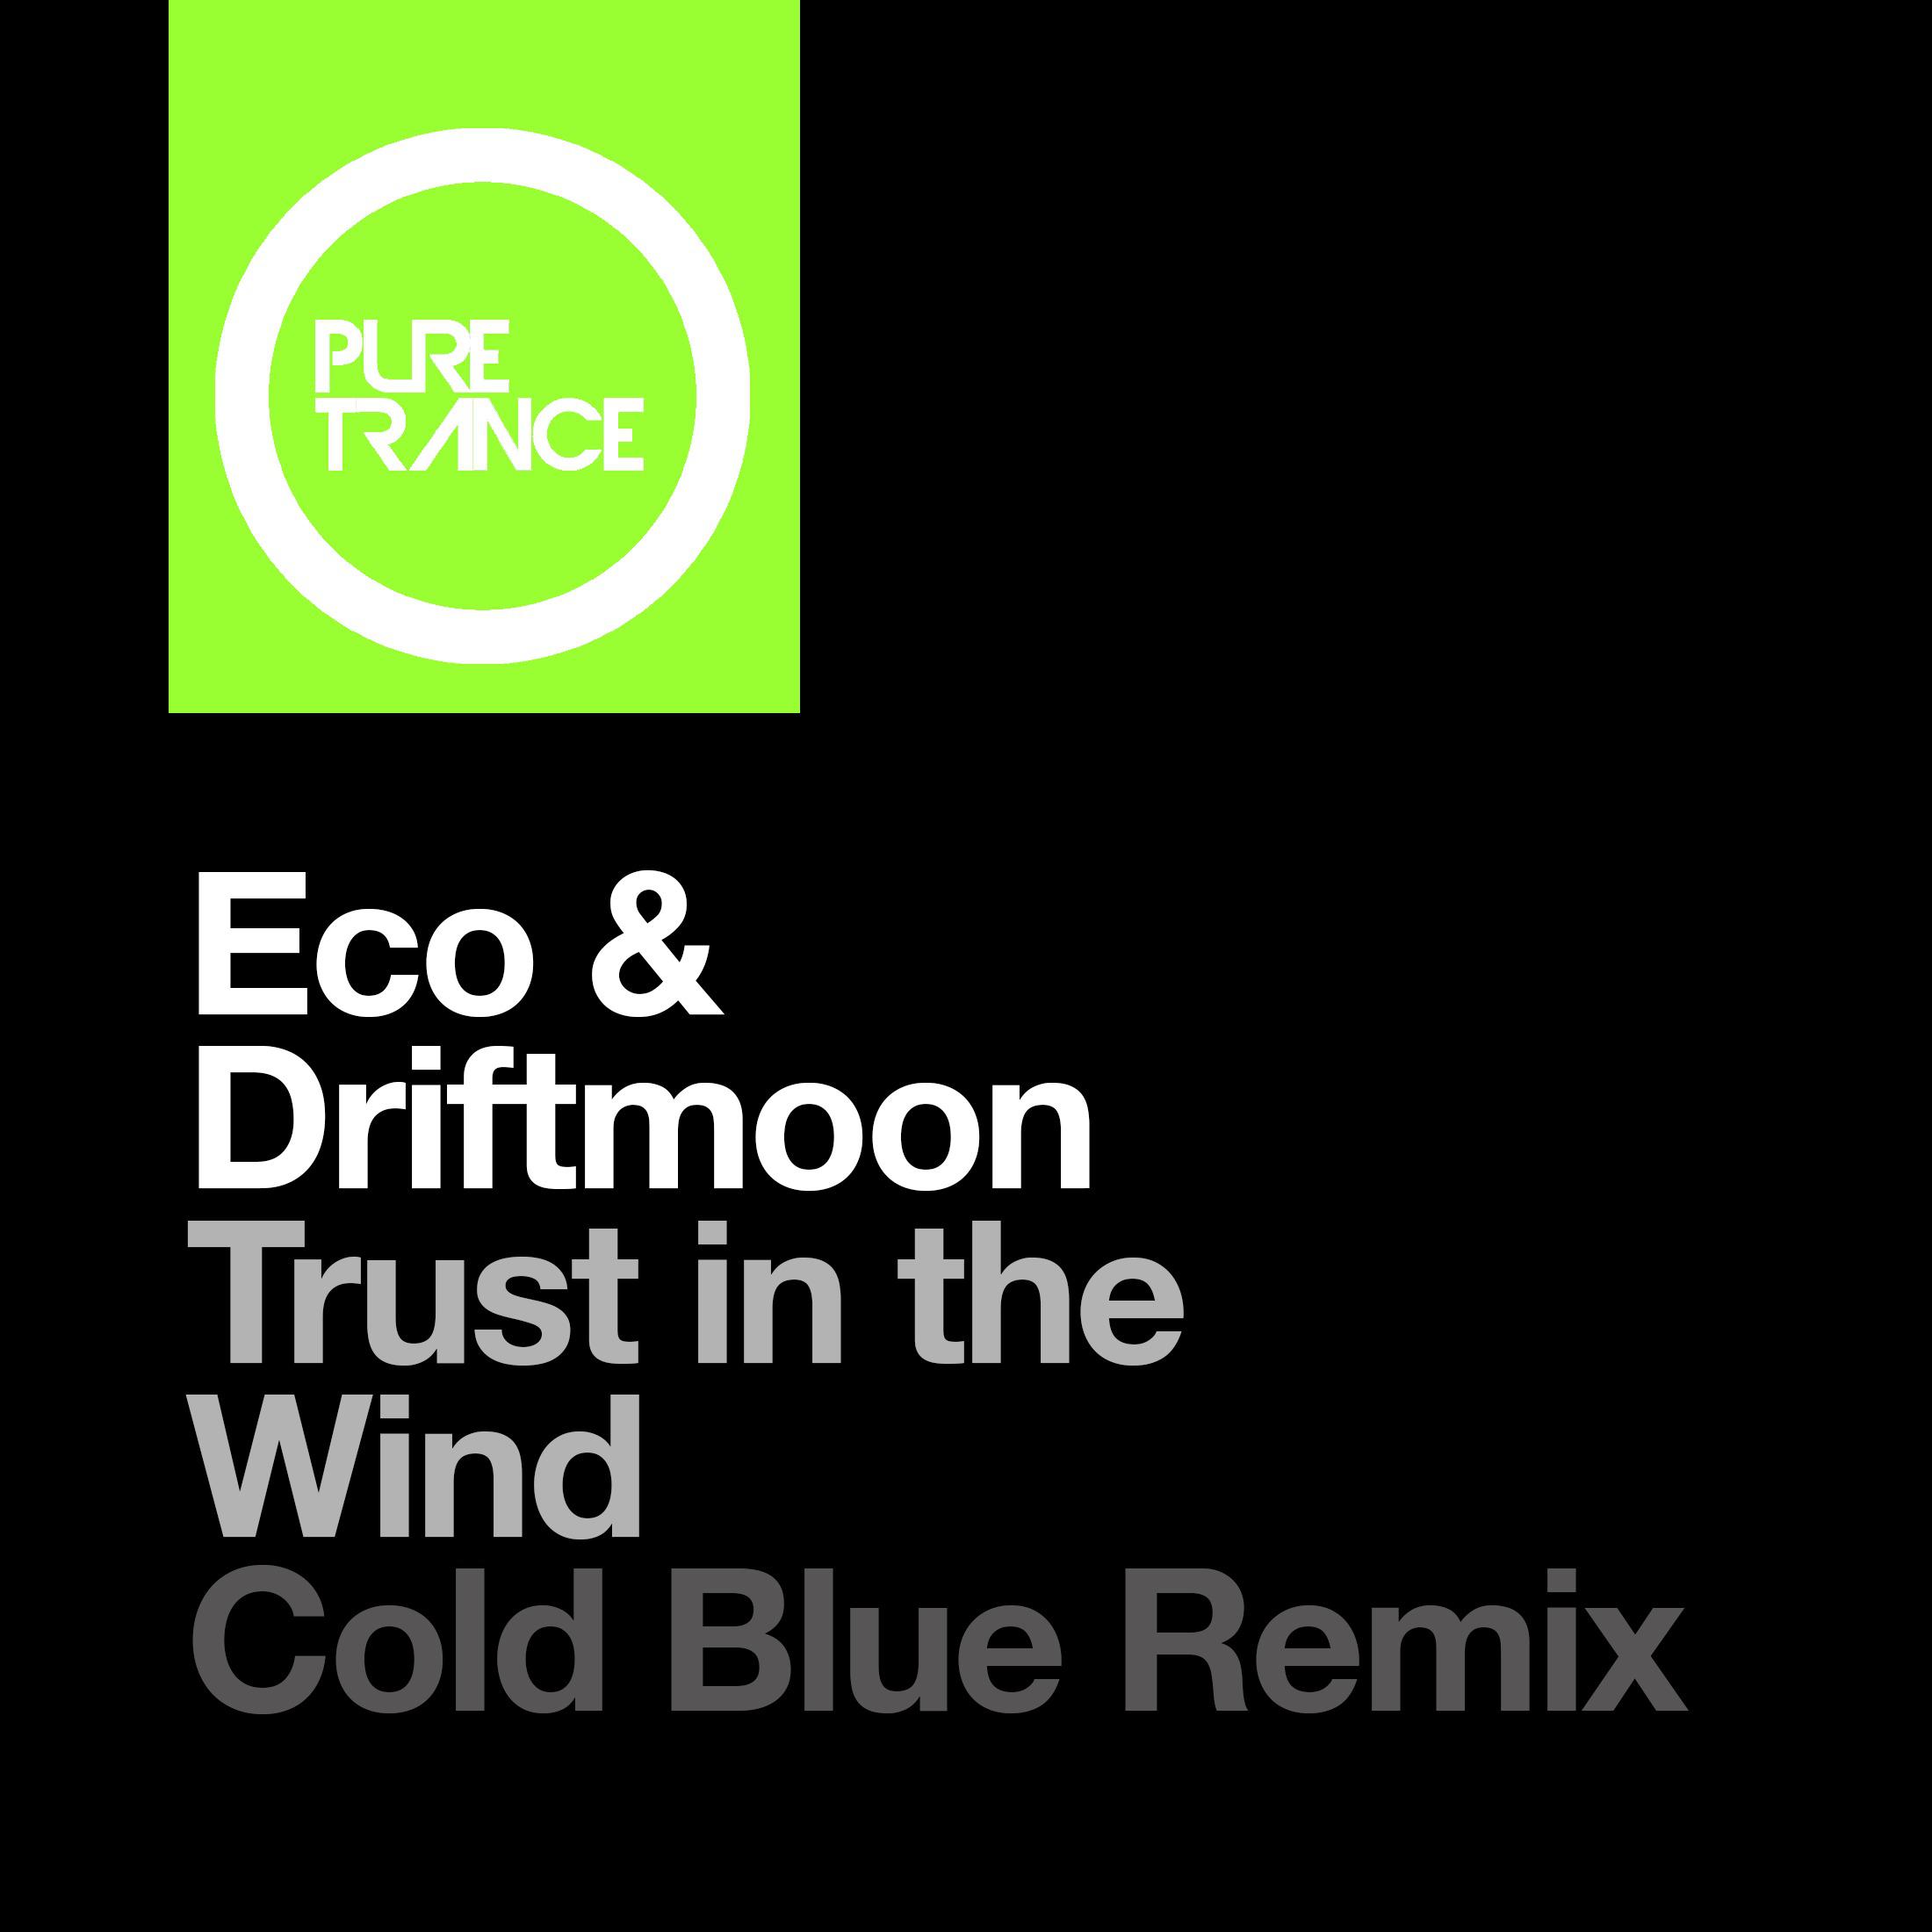 Trust in the Wind (Cold Blue Remix)专辑